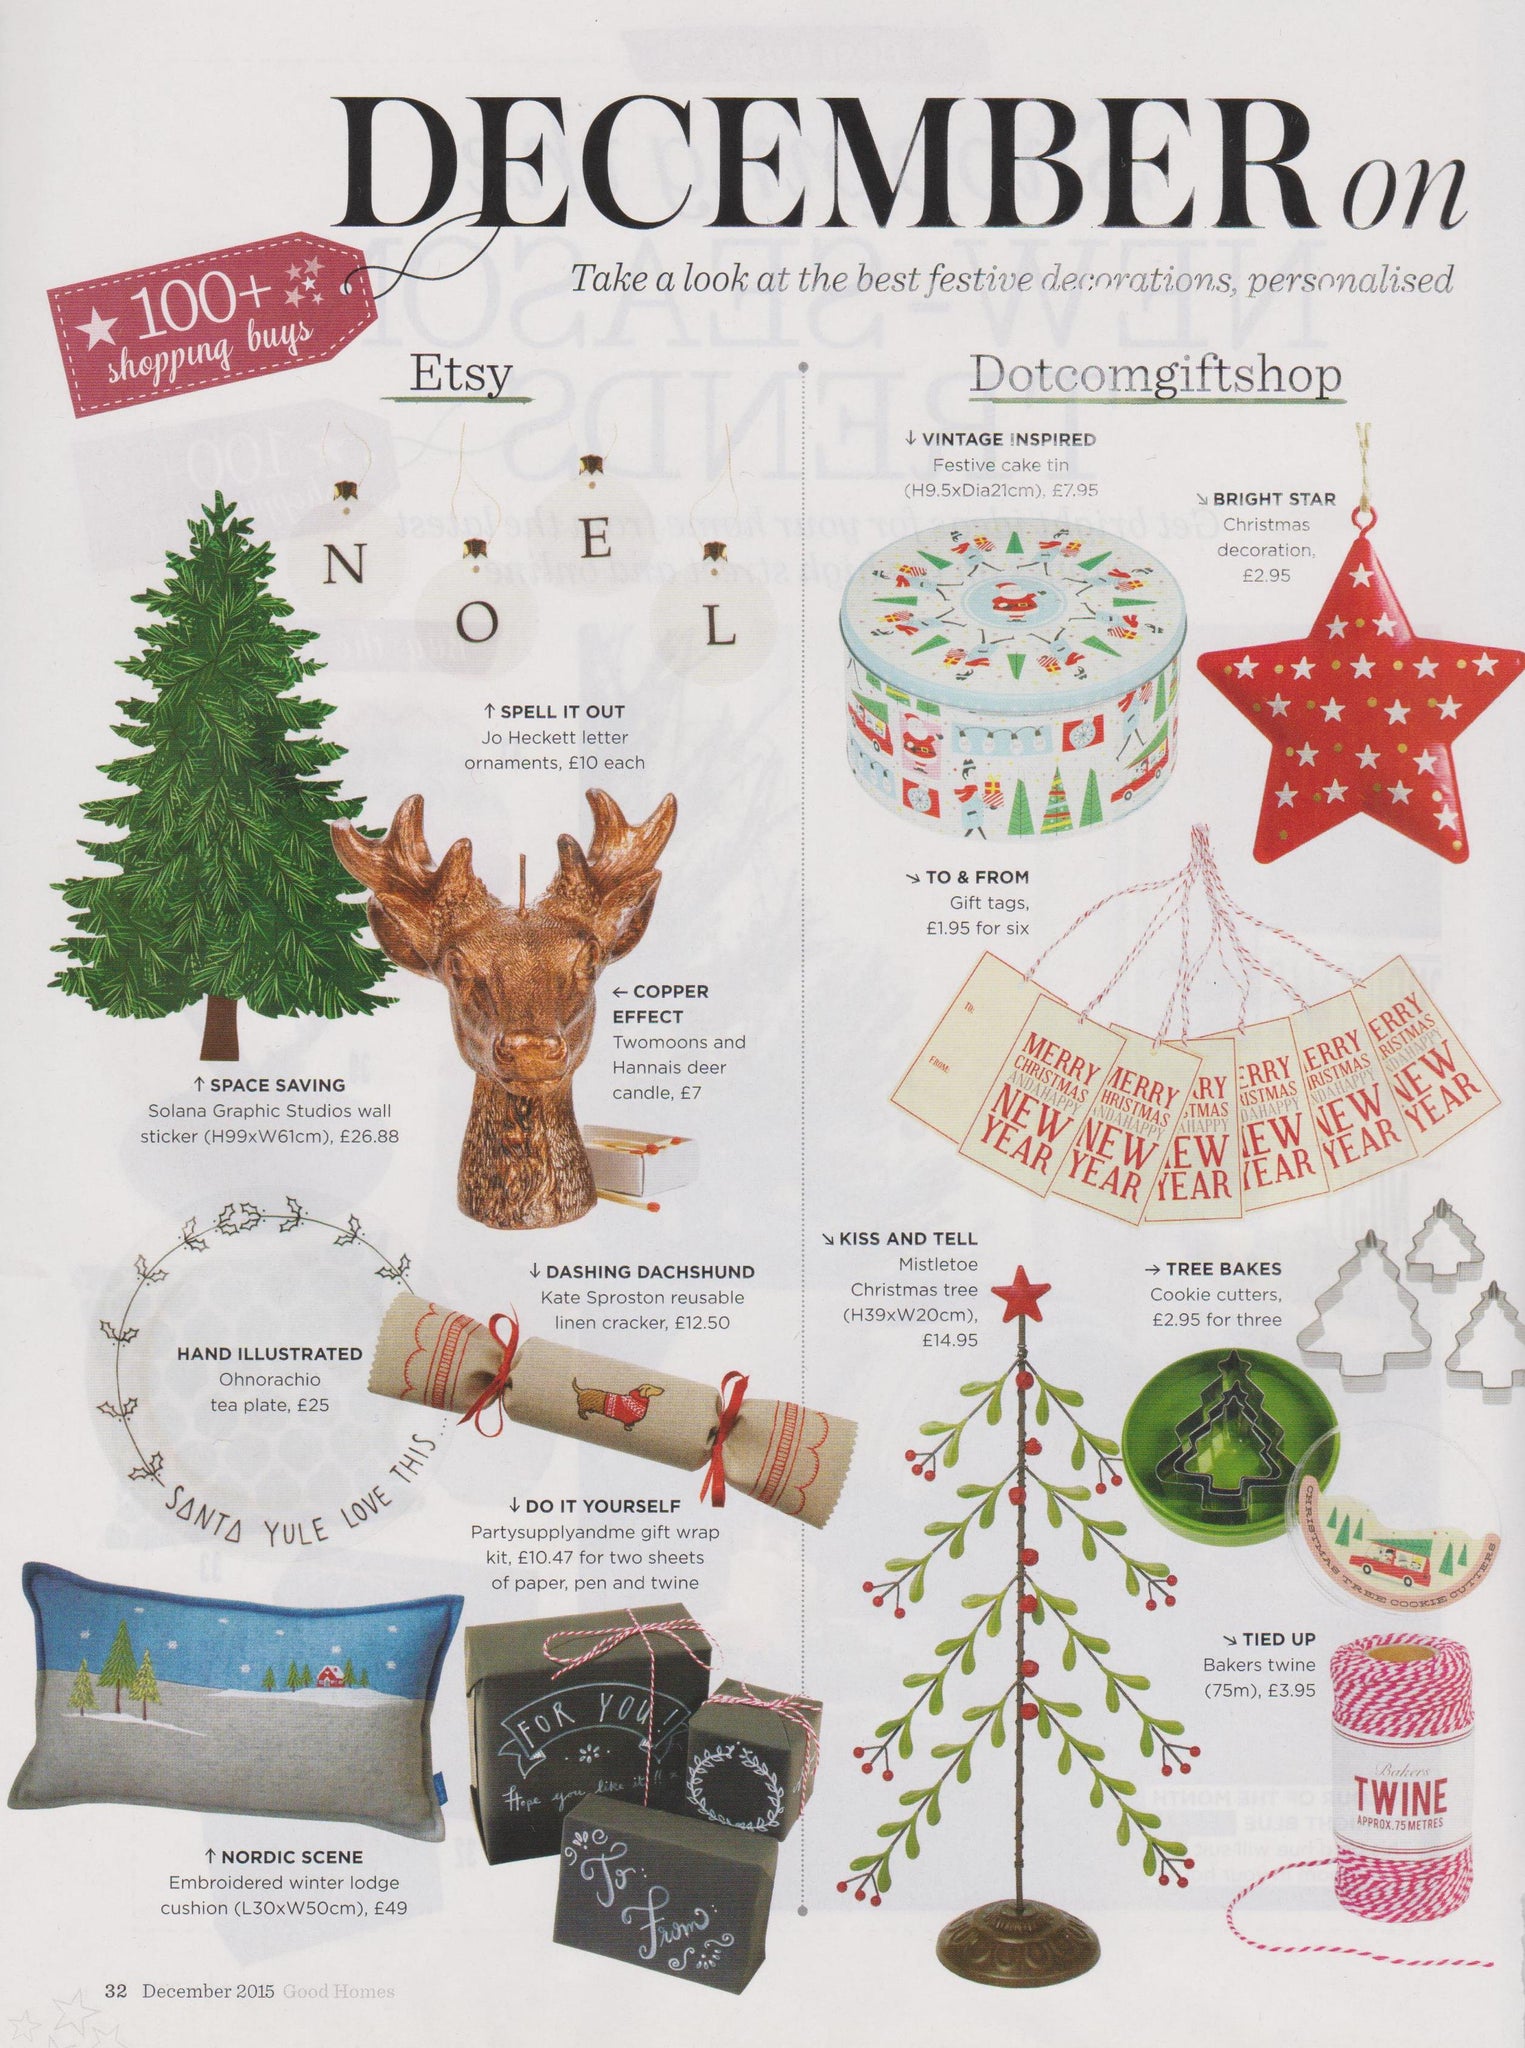 Winter lodge Christmas cushion by Kate Sproston Design as featured in Good Homes Magazine December 2015